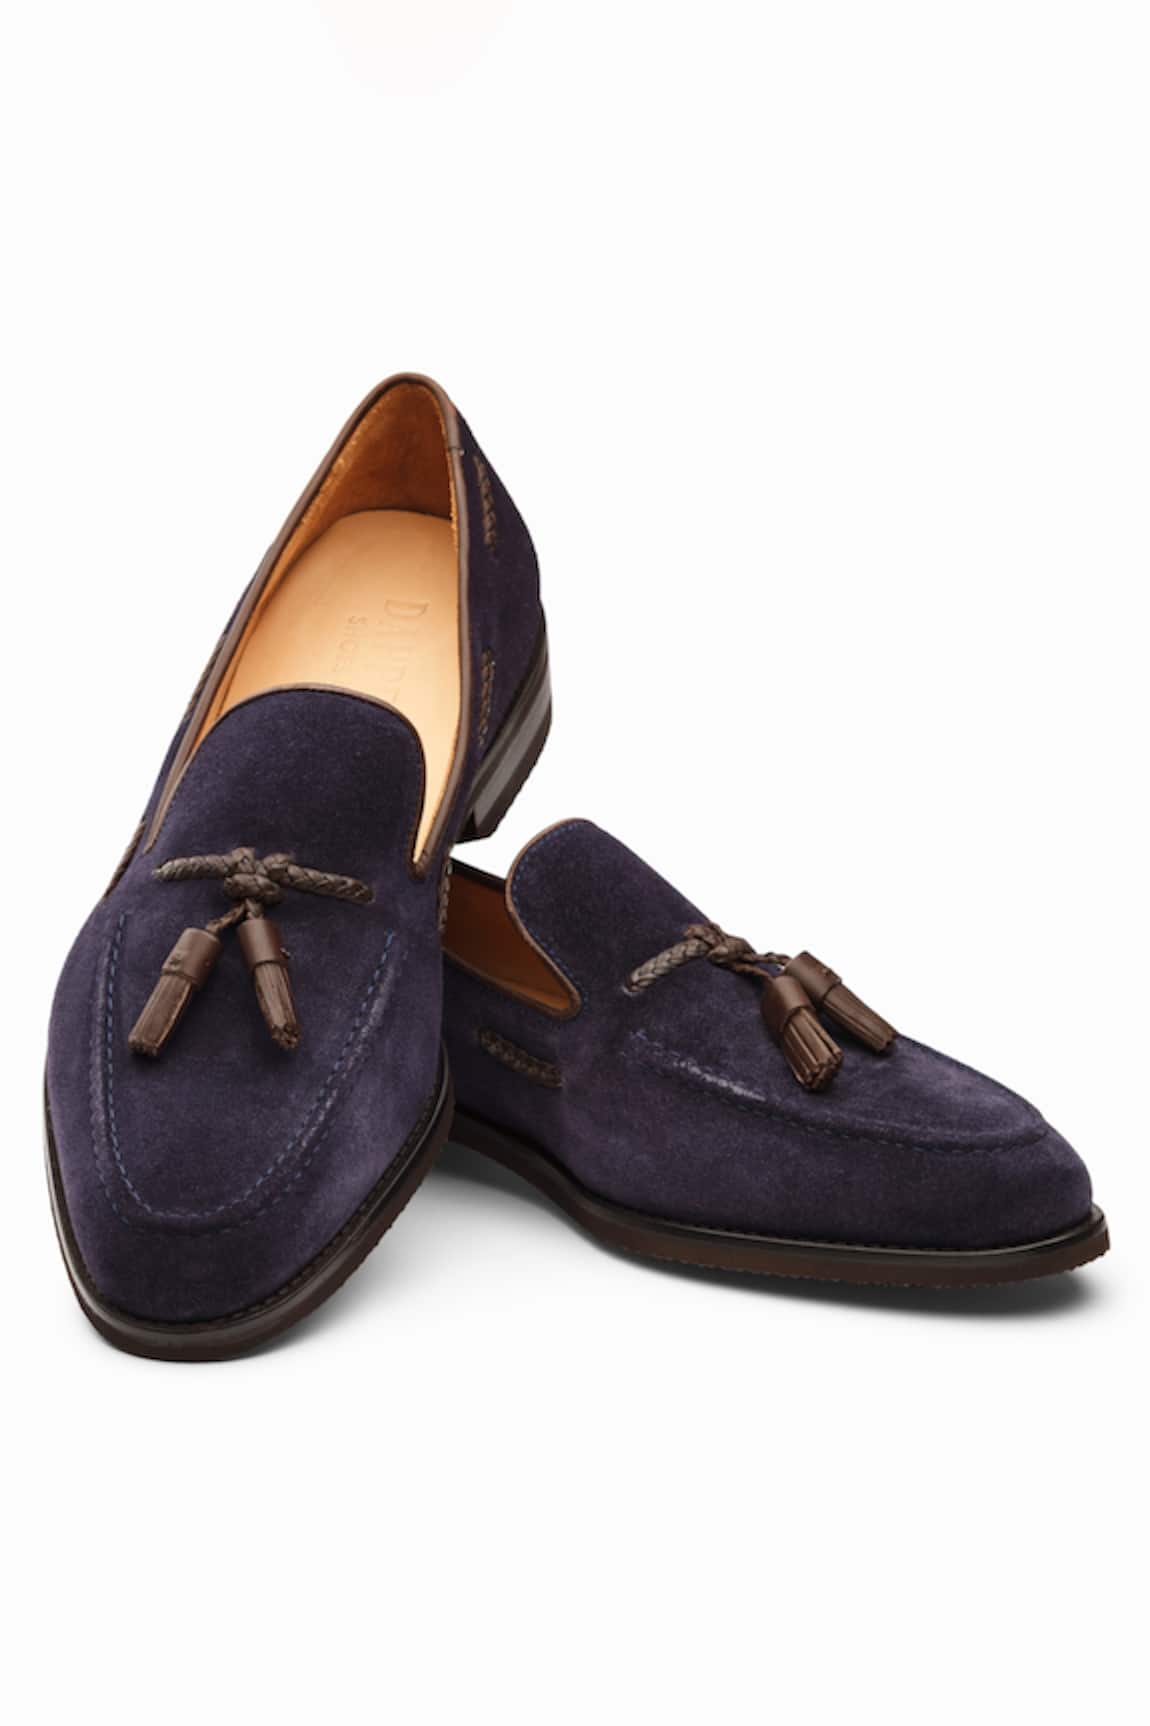 dapper Shoes Suede Leather Tassel Loafers